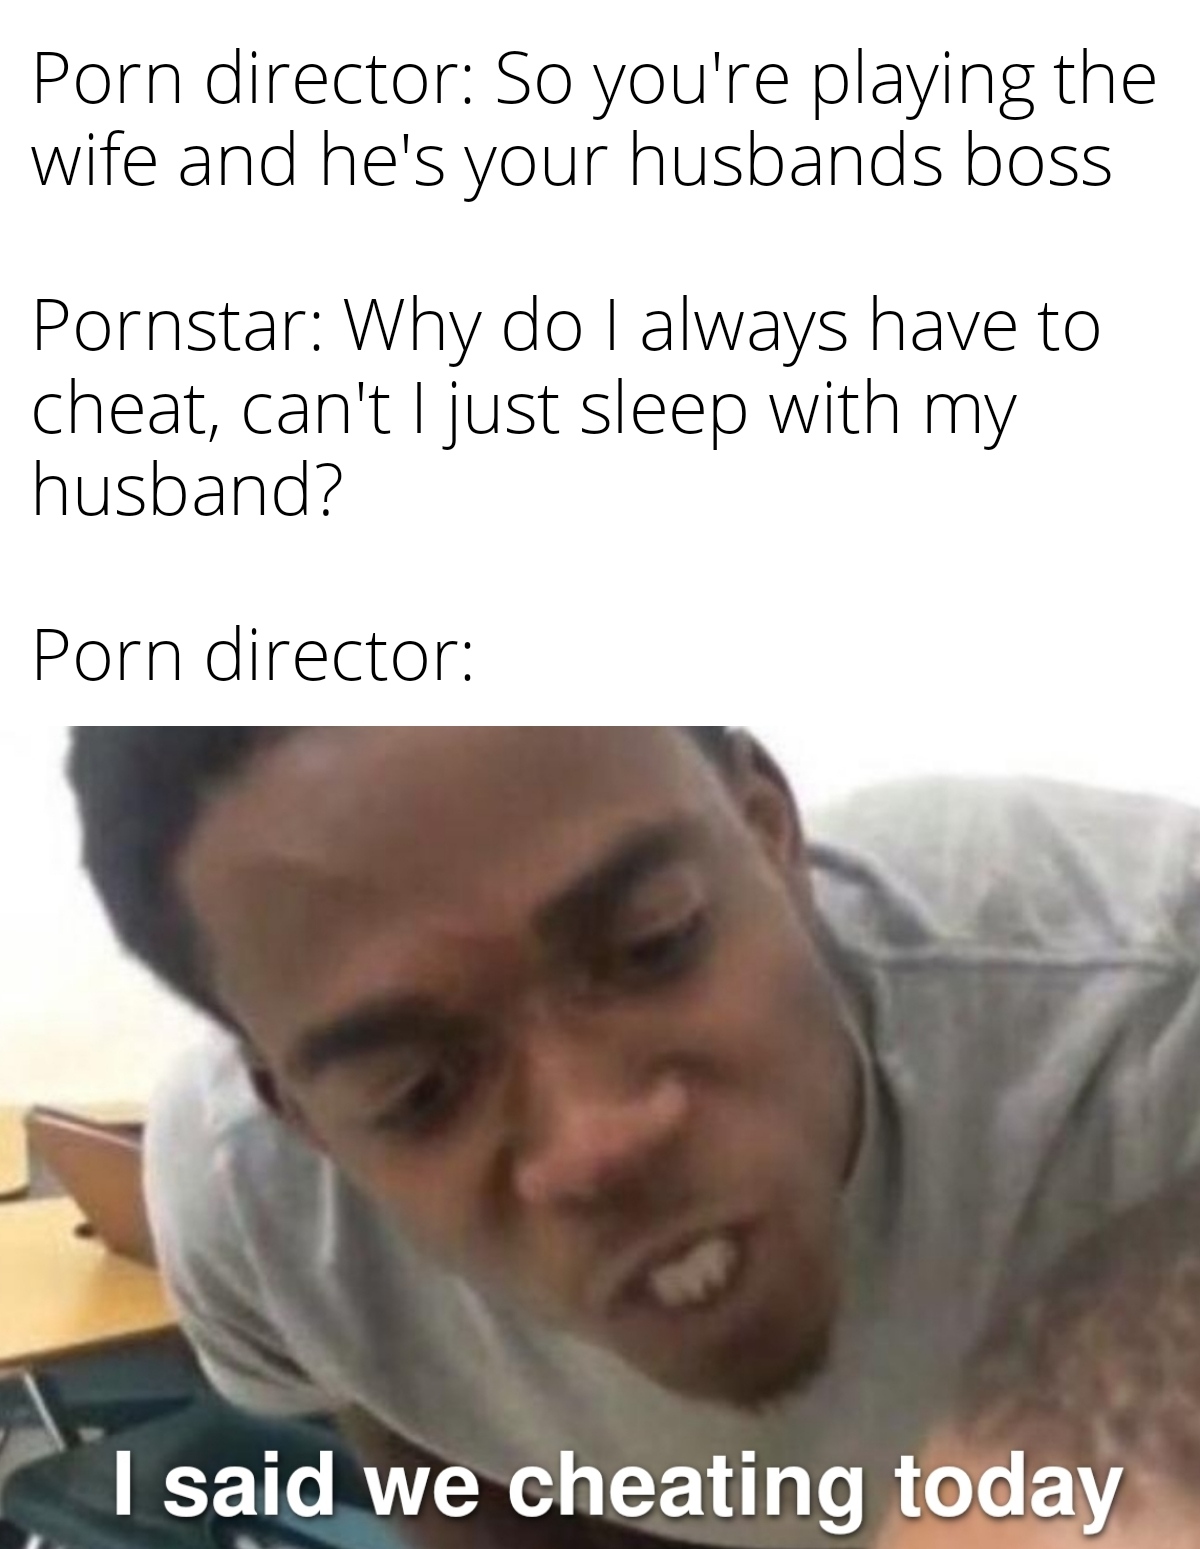 anxiety memes - Porn director So you're playing the wife and he's your husbands boss Pornstar Why do I always have to cheat, can't I just sleep with my husband? Porn director I said we cheating today